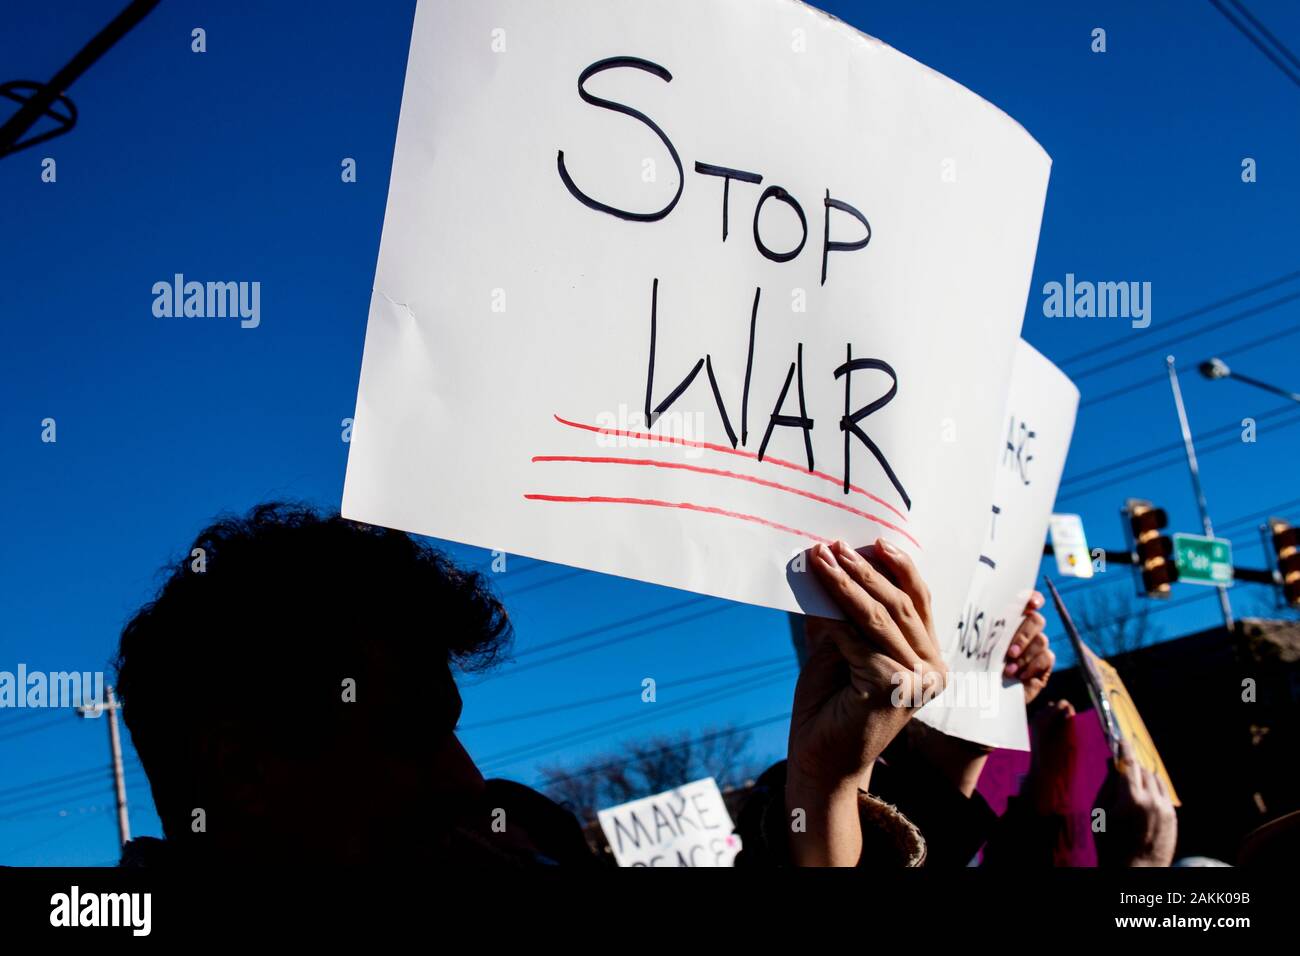 War protestor - Man on street corner holding up Stop War sign with other protestors in distance Stock Photo